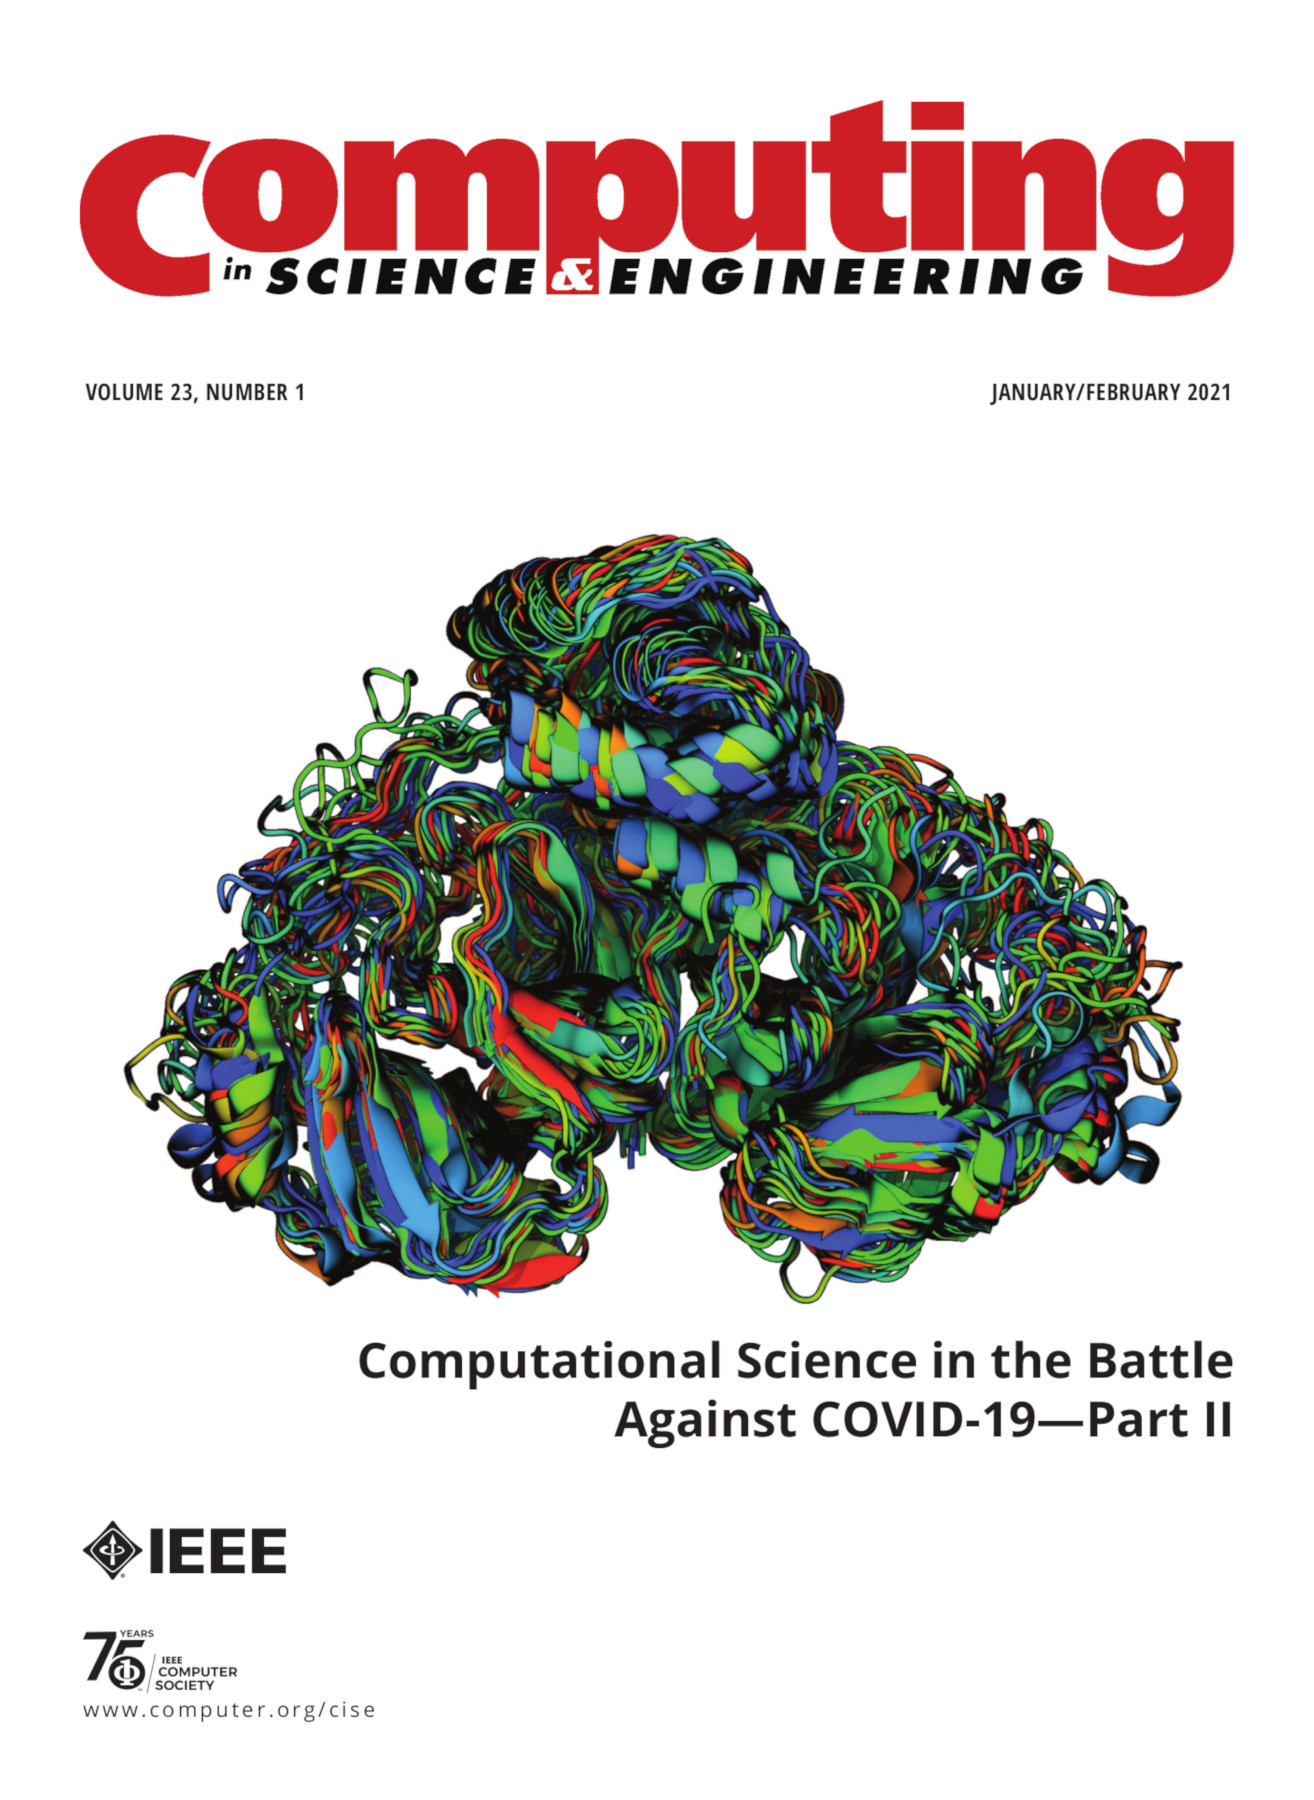 Computing in Science and Engineering January/February 2021 Vol. 23 No. 1